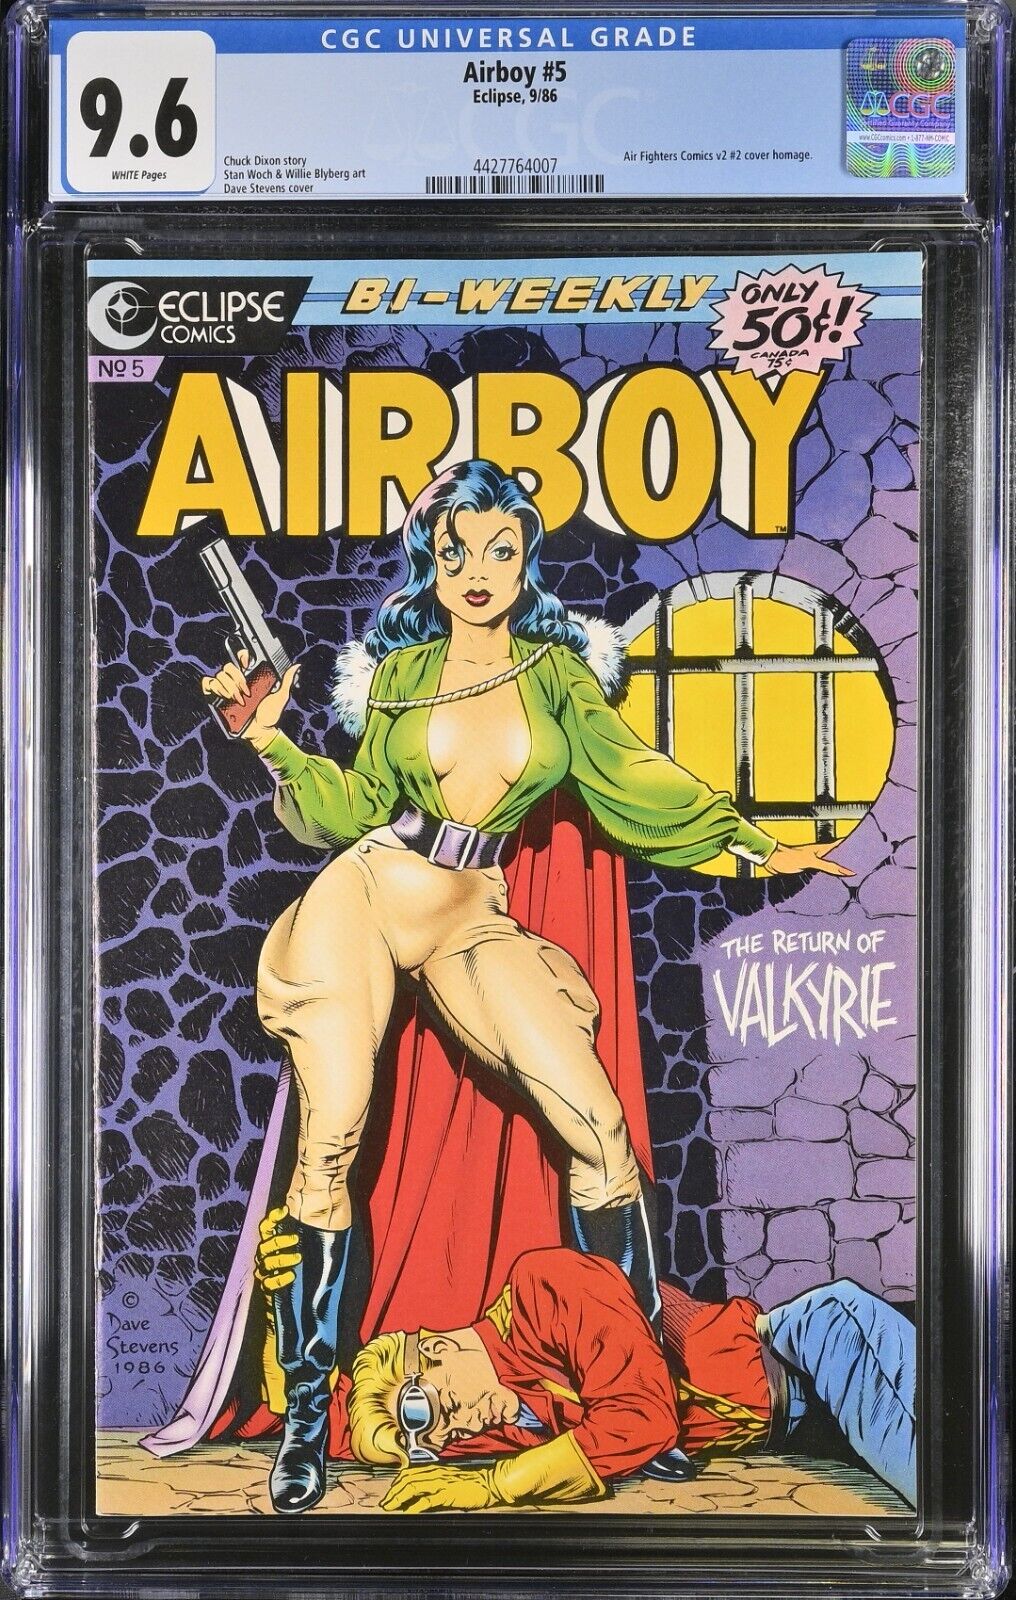 AIRBOY #5 ECLIPSE CGC 9.6 NM+ WP ICONIC DAVE STEVENS VALKYRIE COVER SHIPS FREE